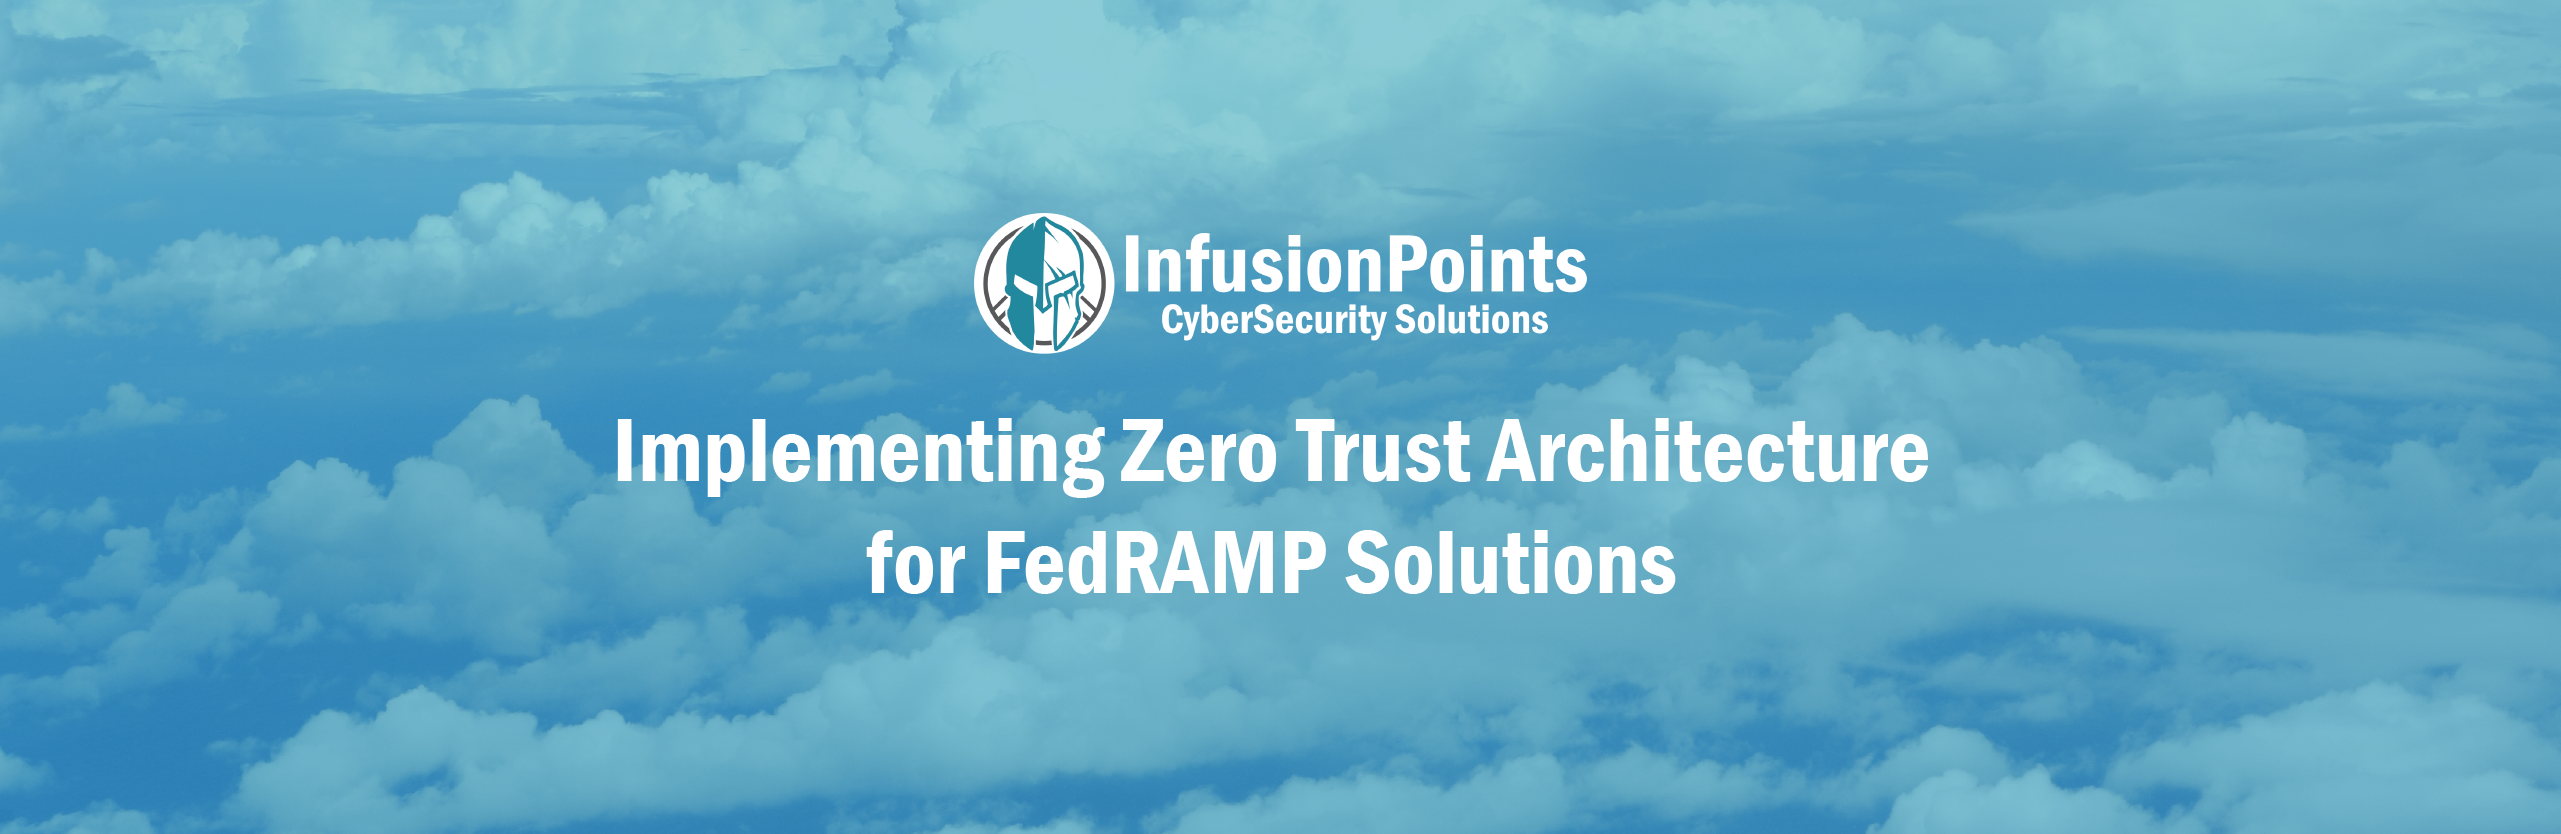 Implementing Zero Trust Architecture for FedRAMP Solutions 